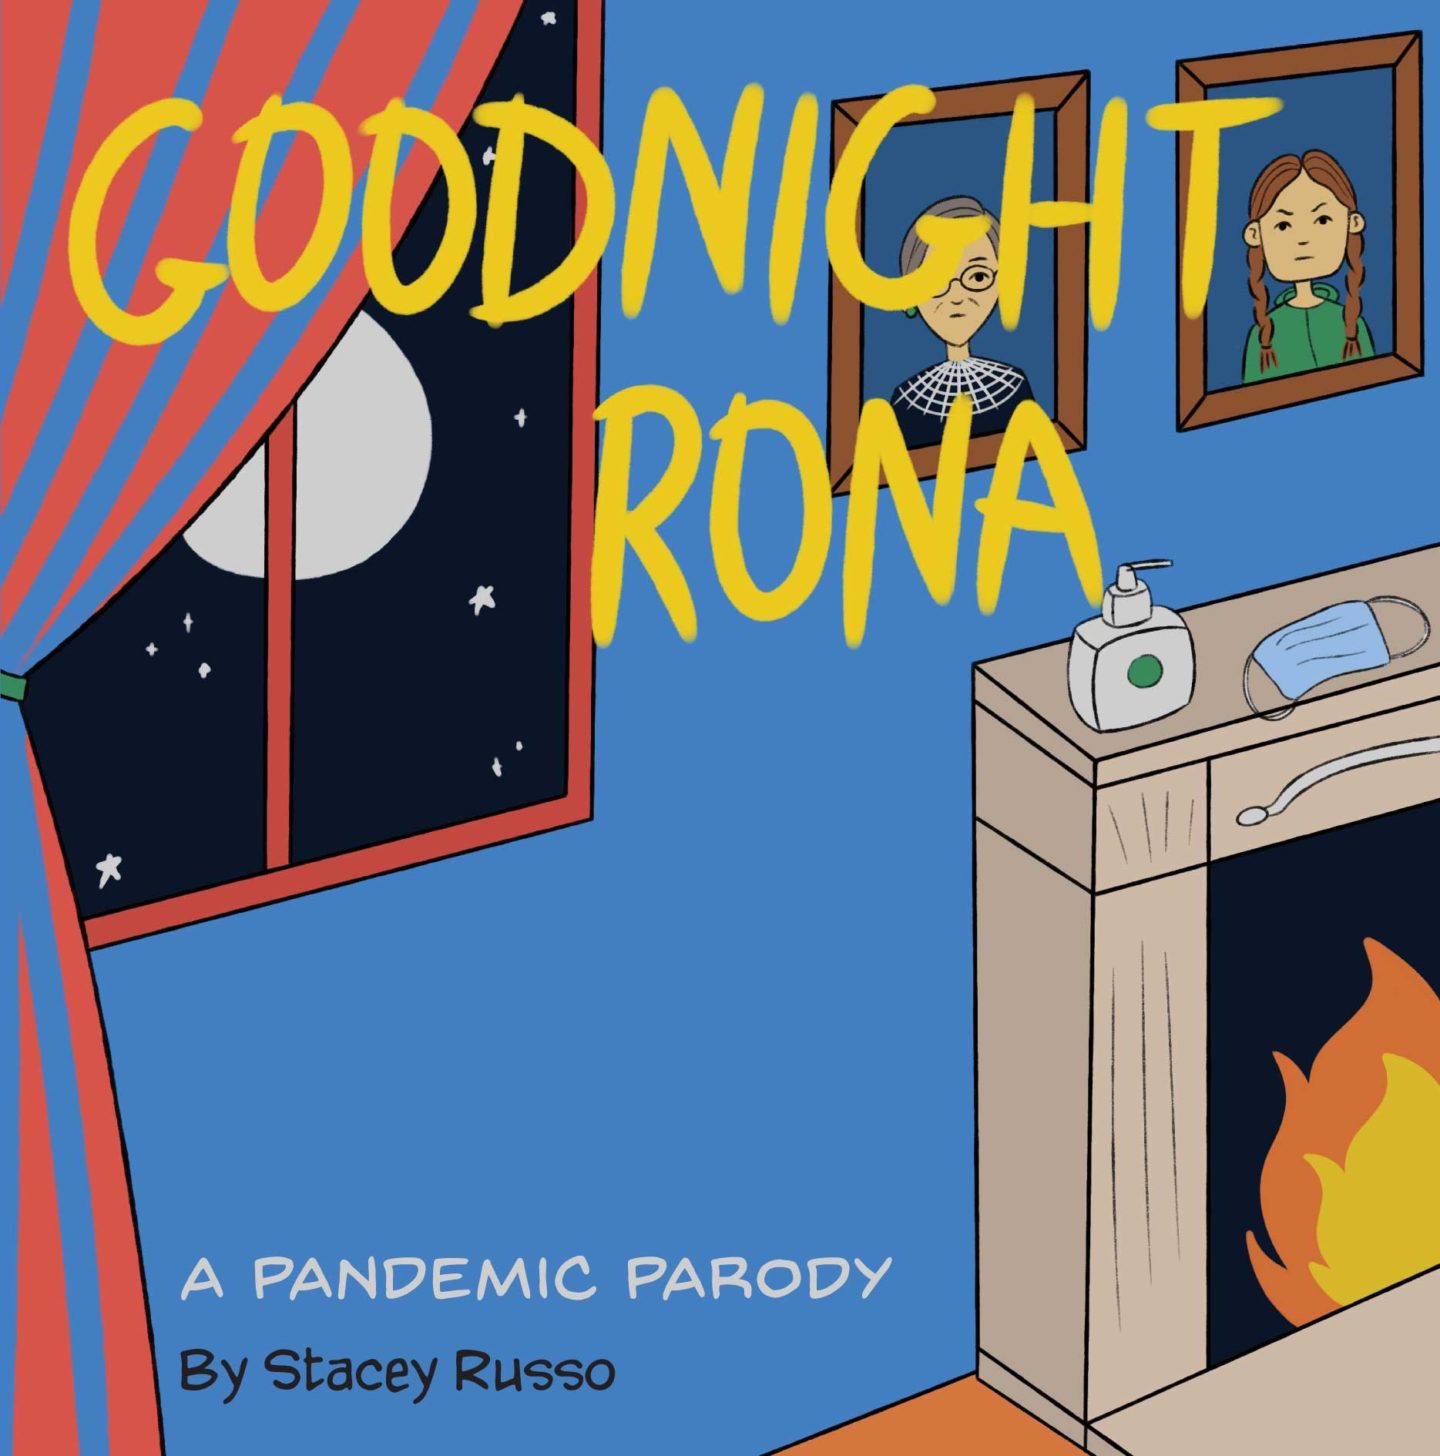 Goodnight Rona, A Book Review. A funny parody to Goodnight Moon